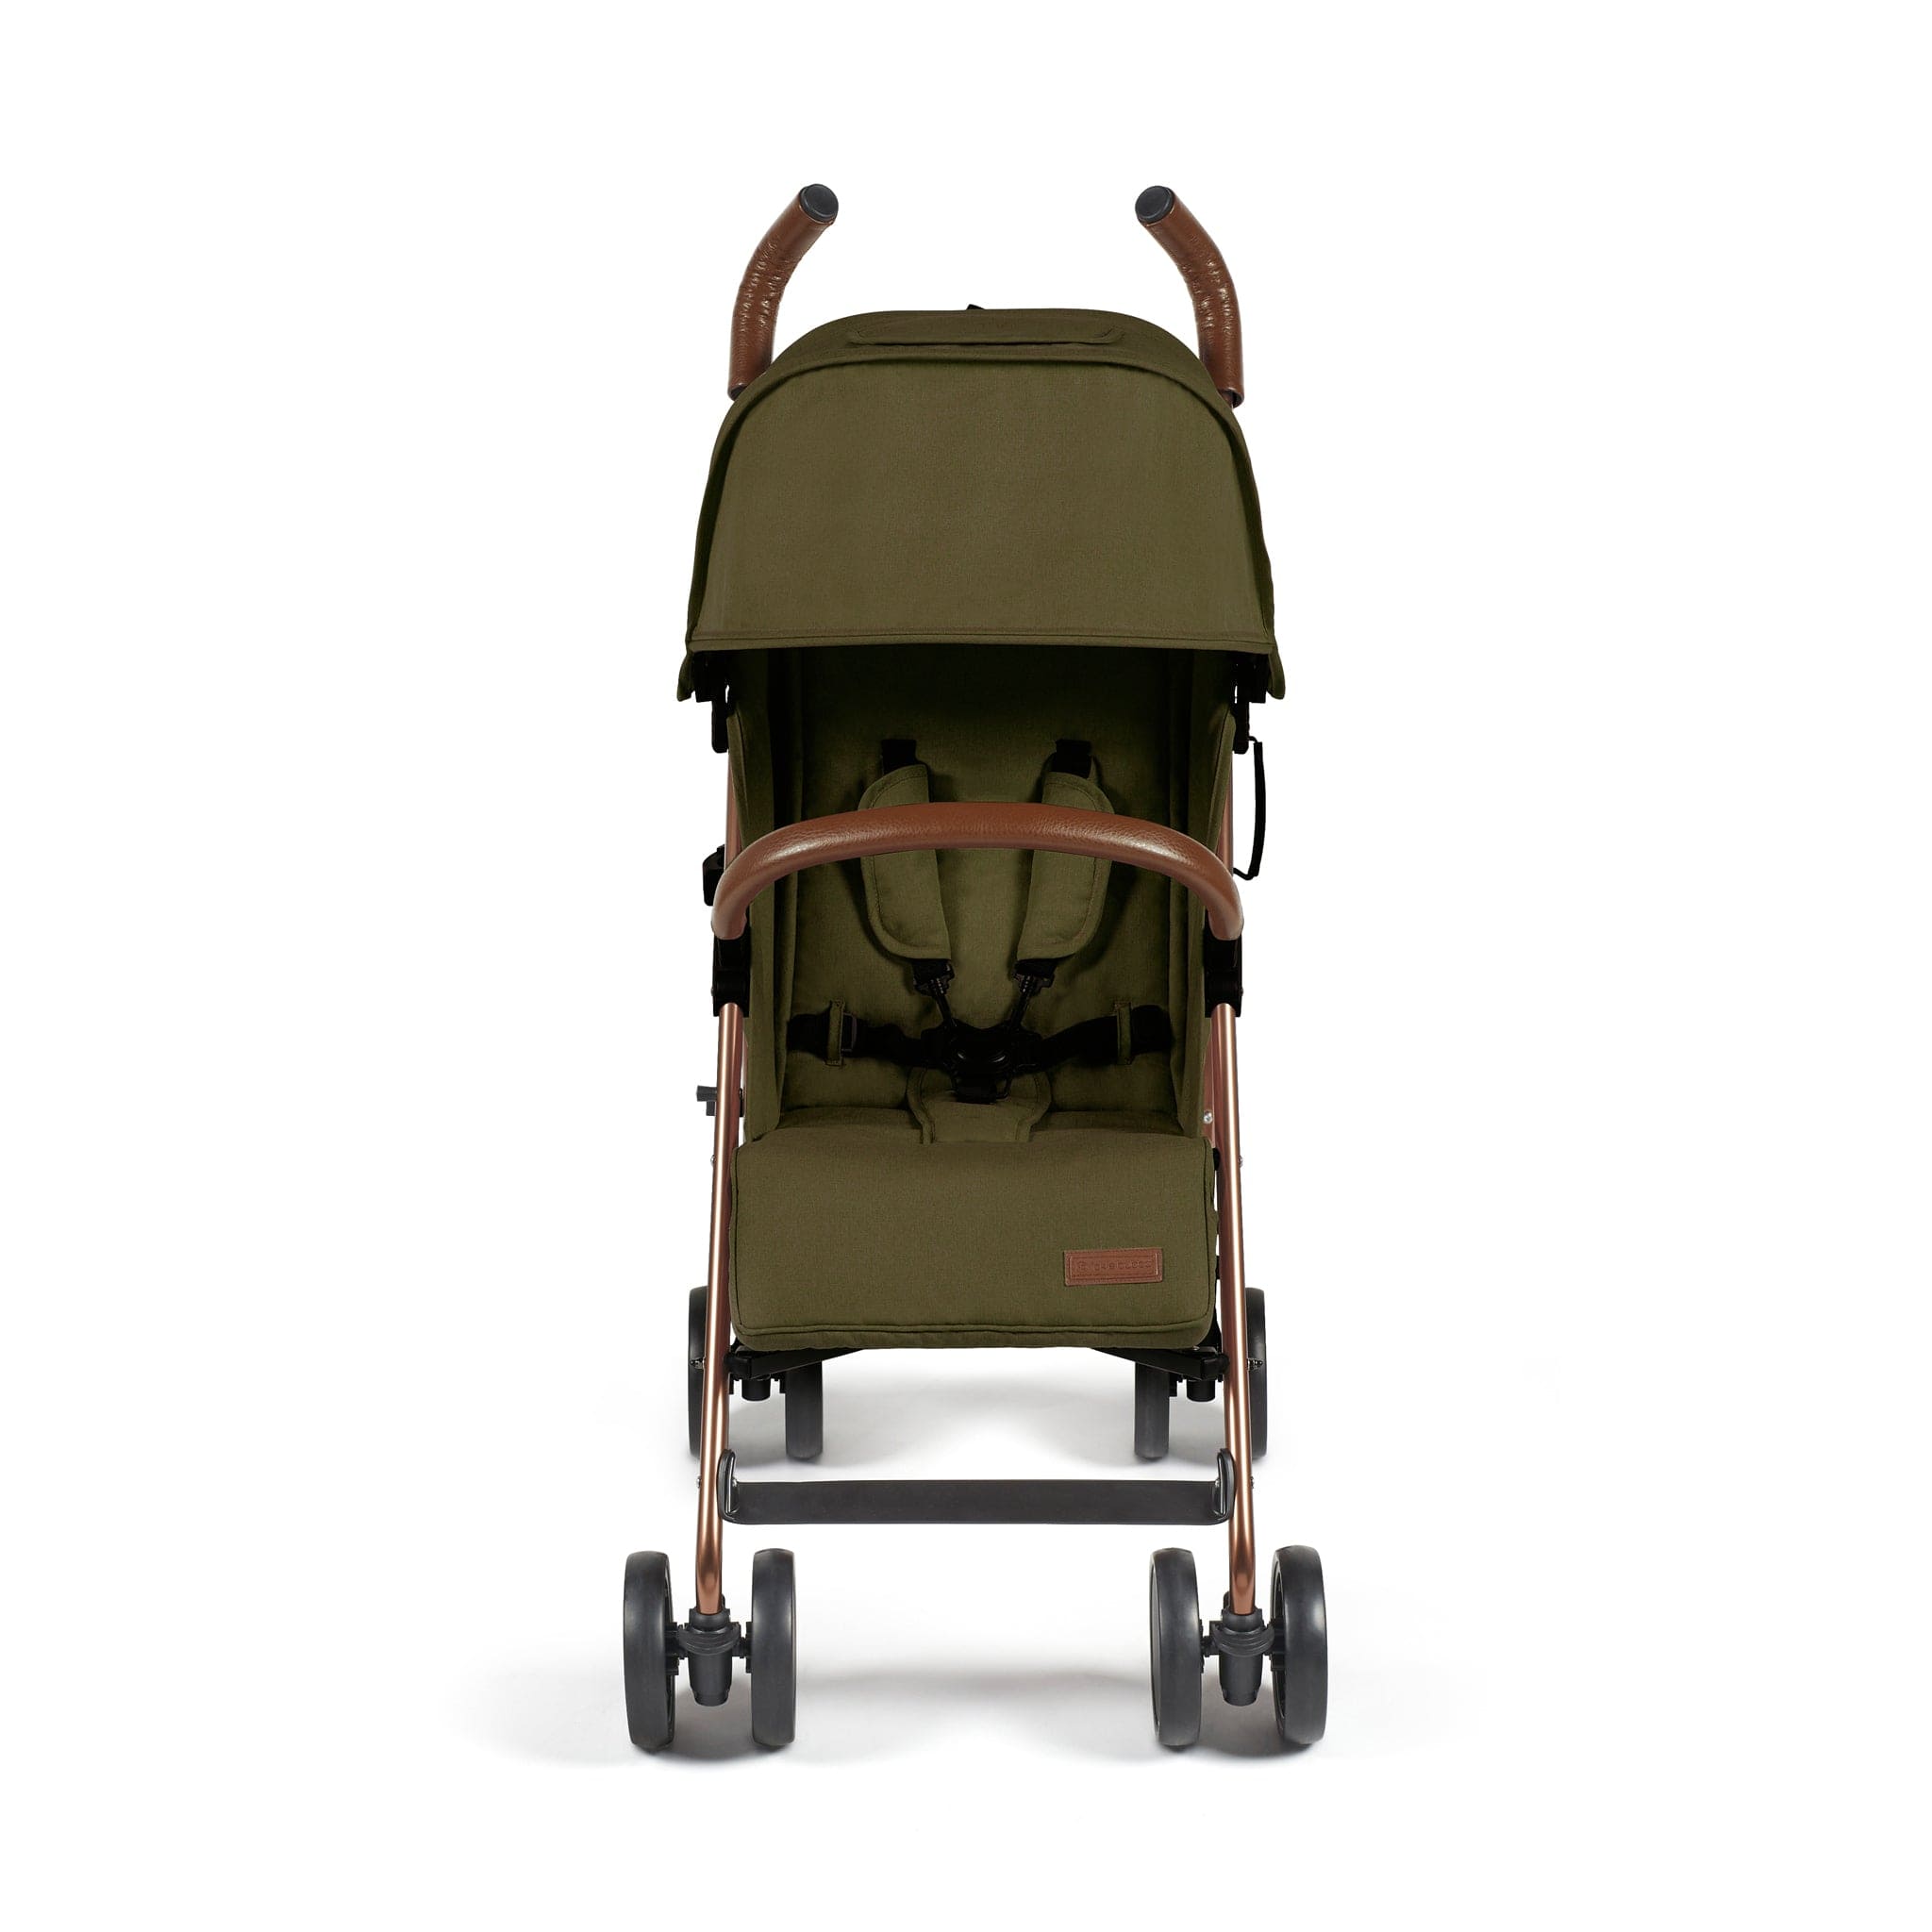 Ickle Bubba Discovery Stroller Rose Gold/Khaki Pushchairs & Buggies 15-002-100-045 0700355999041